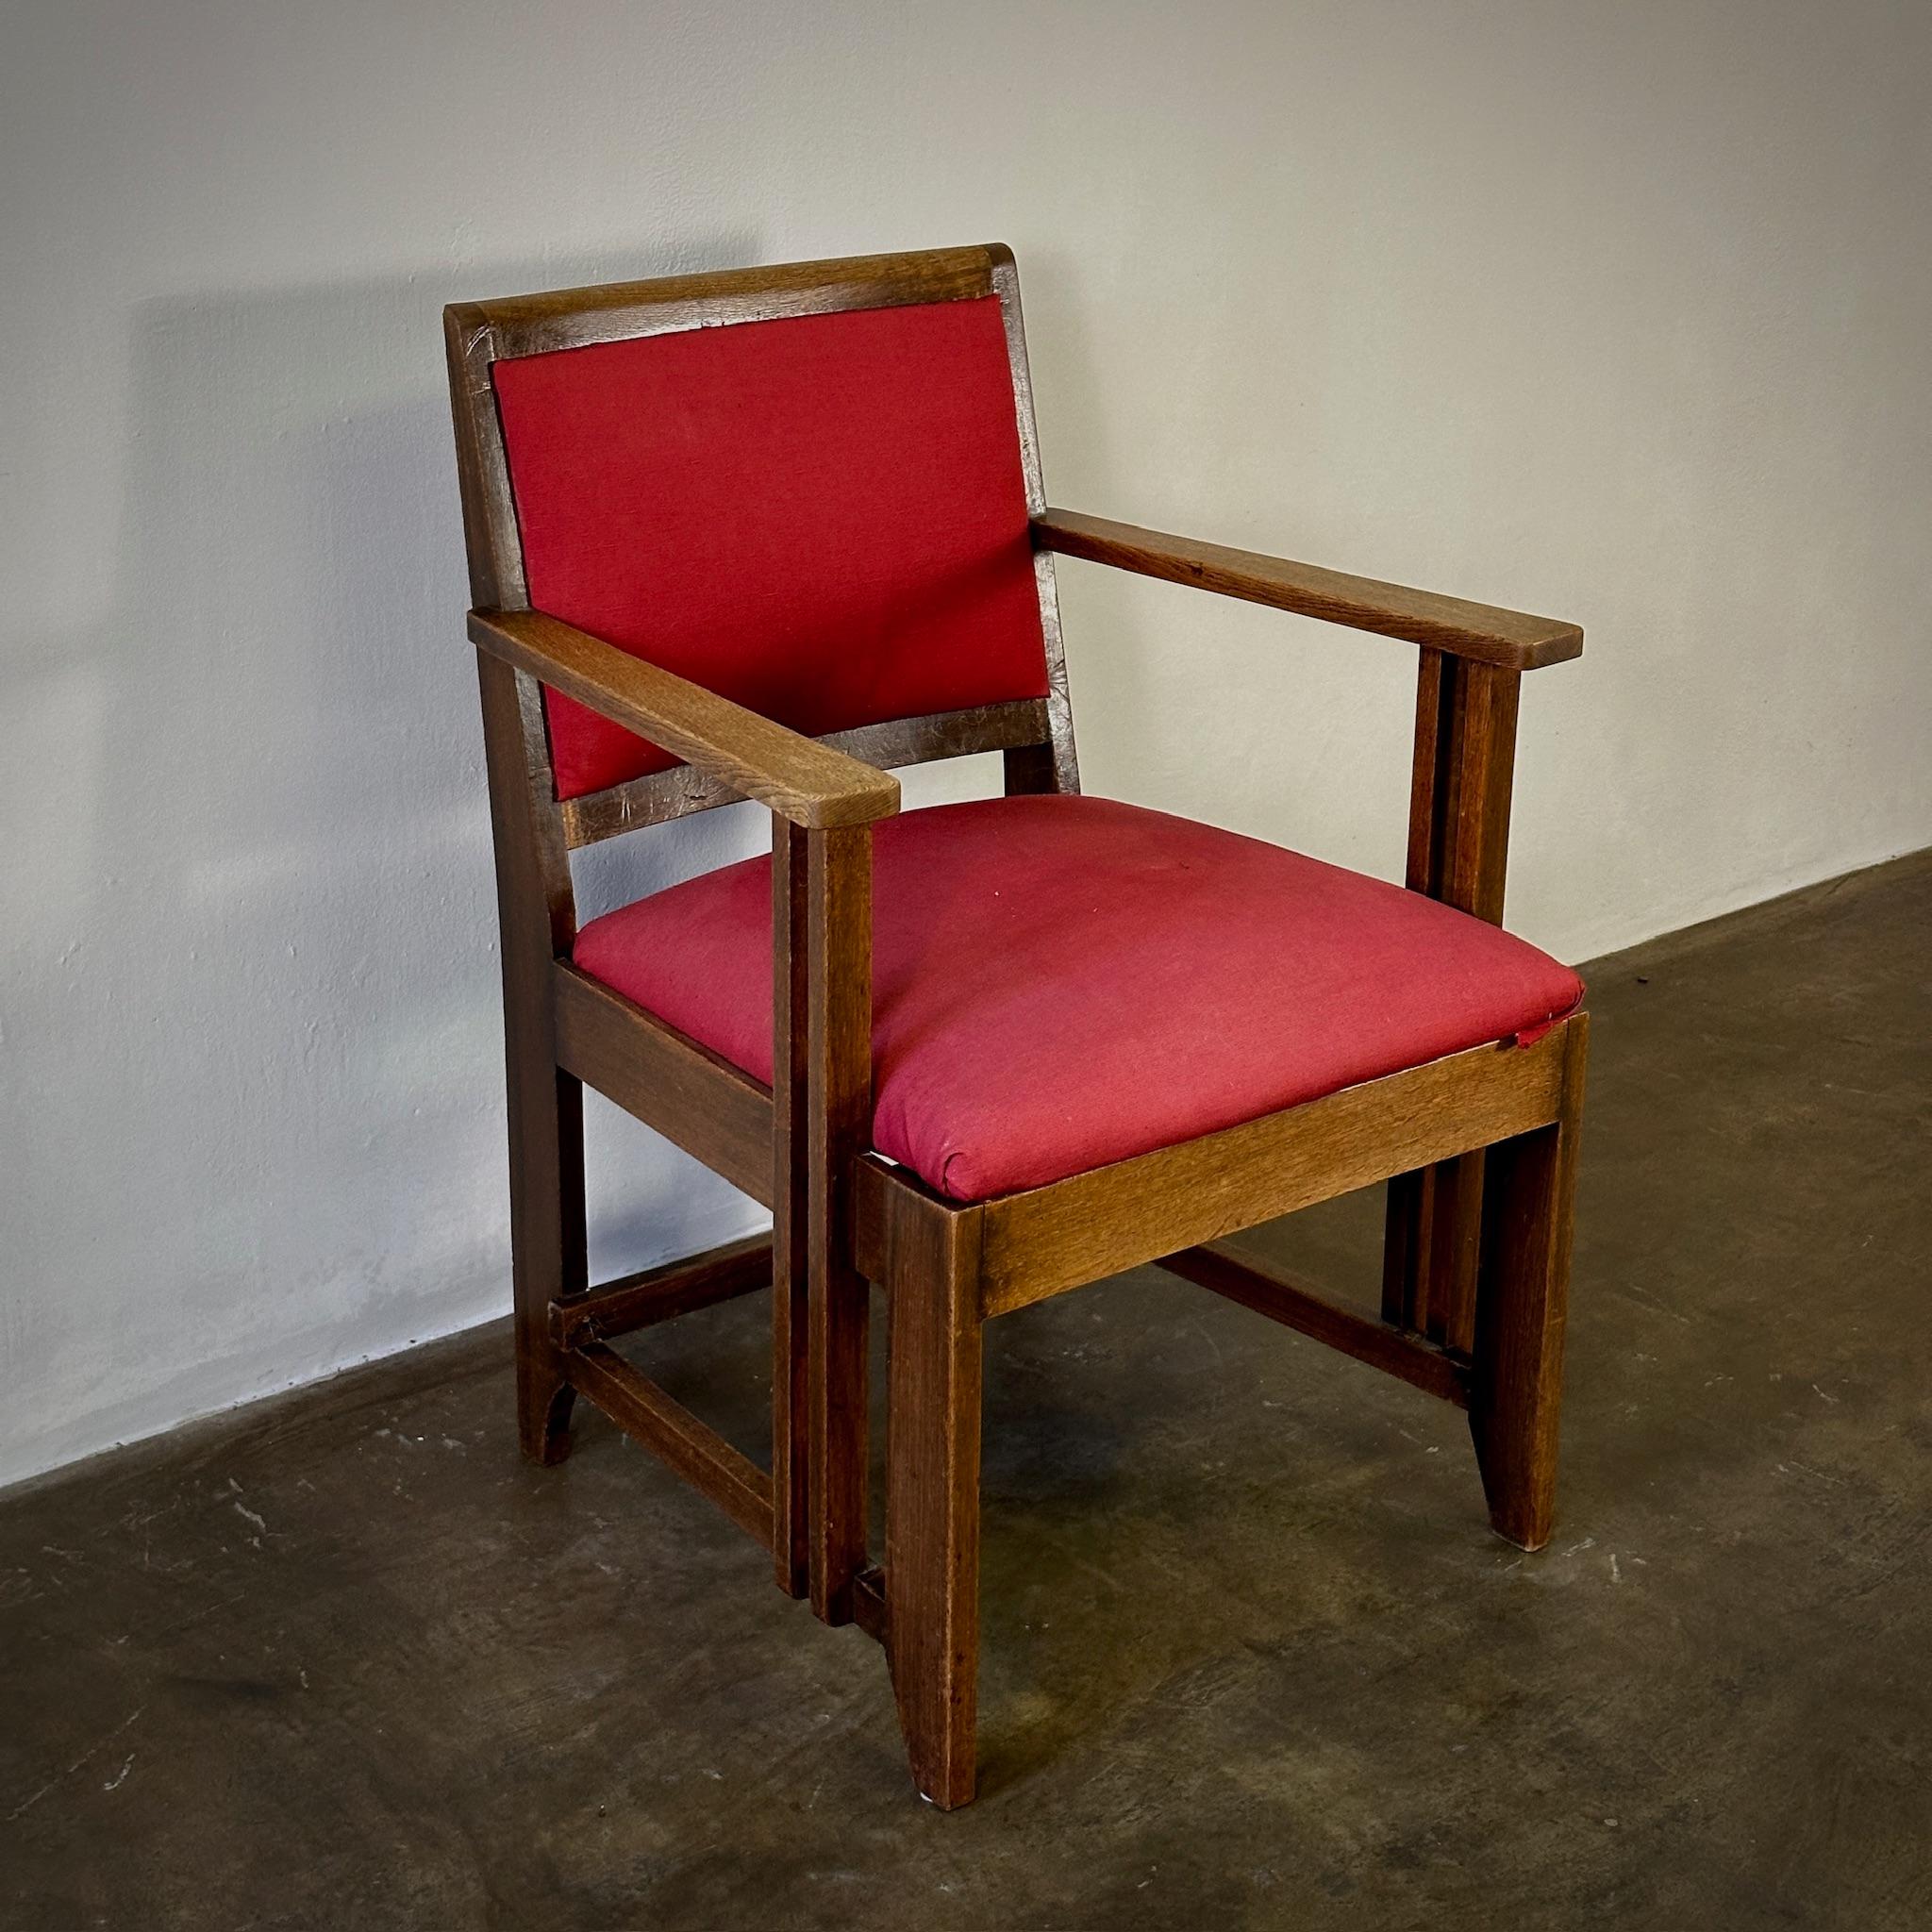 Carmine red upholstered Amsterdam School armchair with oak framework, designed by Hendrik Wouda. An exceptional work of 1930s Dutch modernism, this sleek yet inviting accent chair could work well in a variety of spaces.

Netherlands, circa